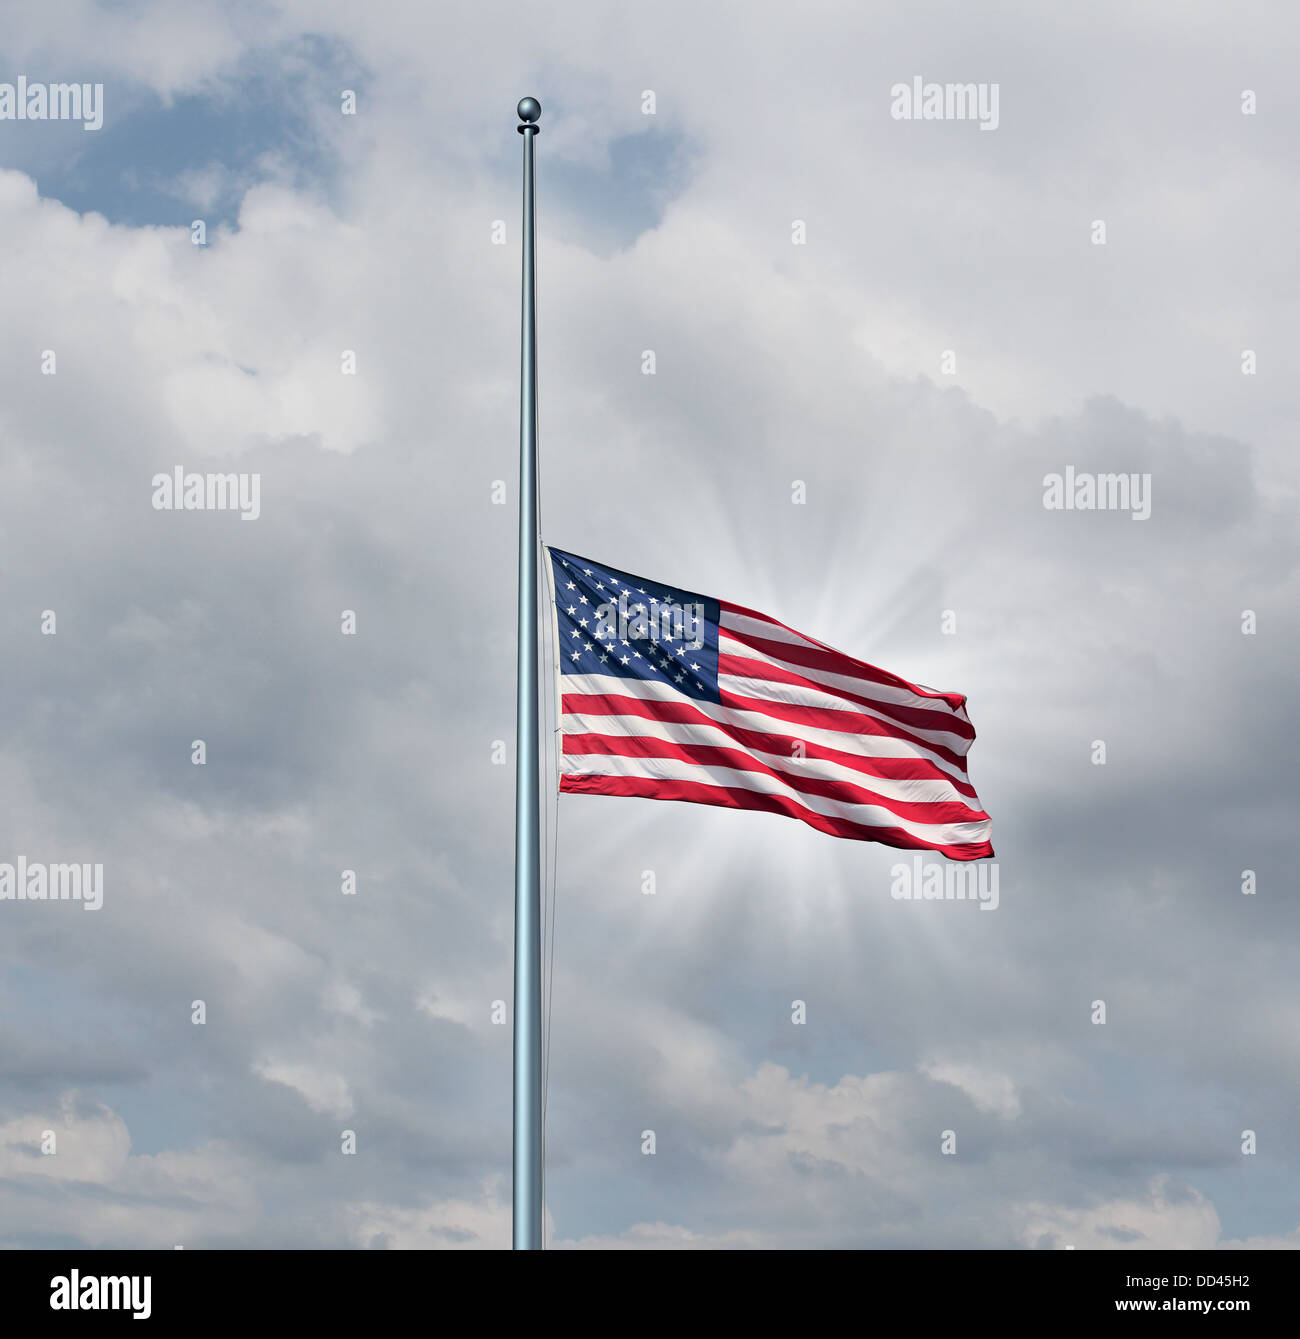 Half mast American flag concept with the symbol of the United States flying at low level on the flagpole or staff on a cloudy day with a sun glow as an icon of honor respect and mourning for fallen heros. Stock Photo